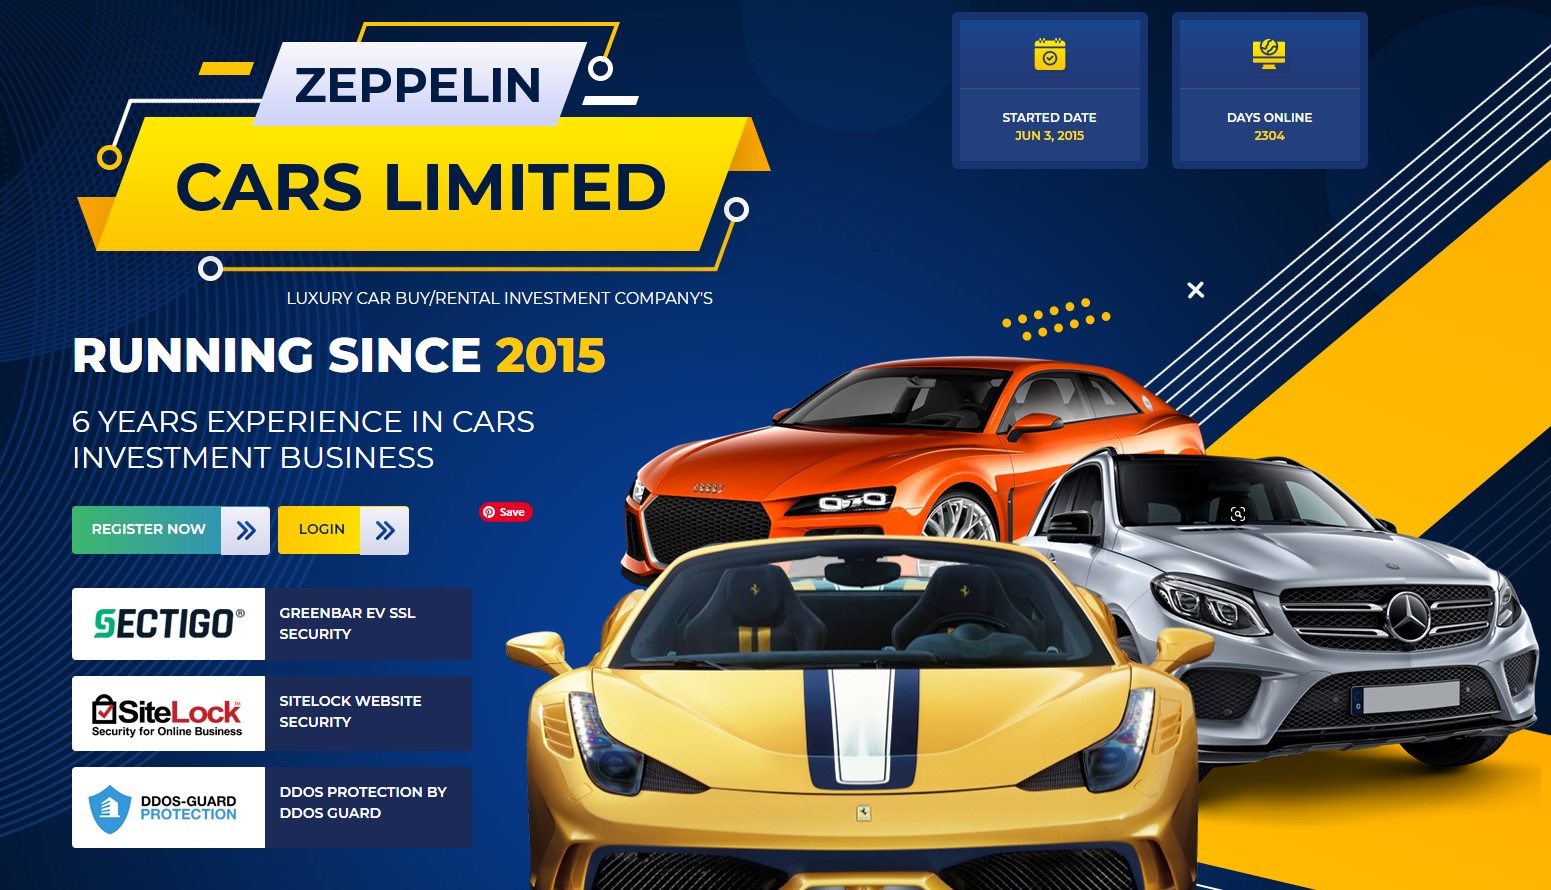 Zeppelin Cars Limited scam